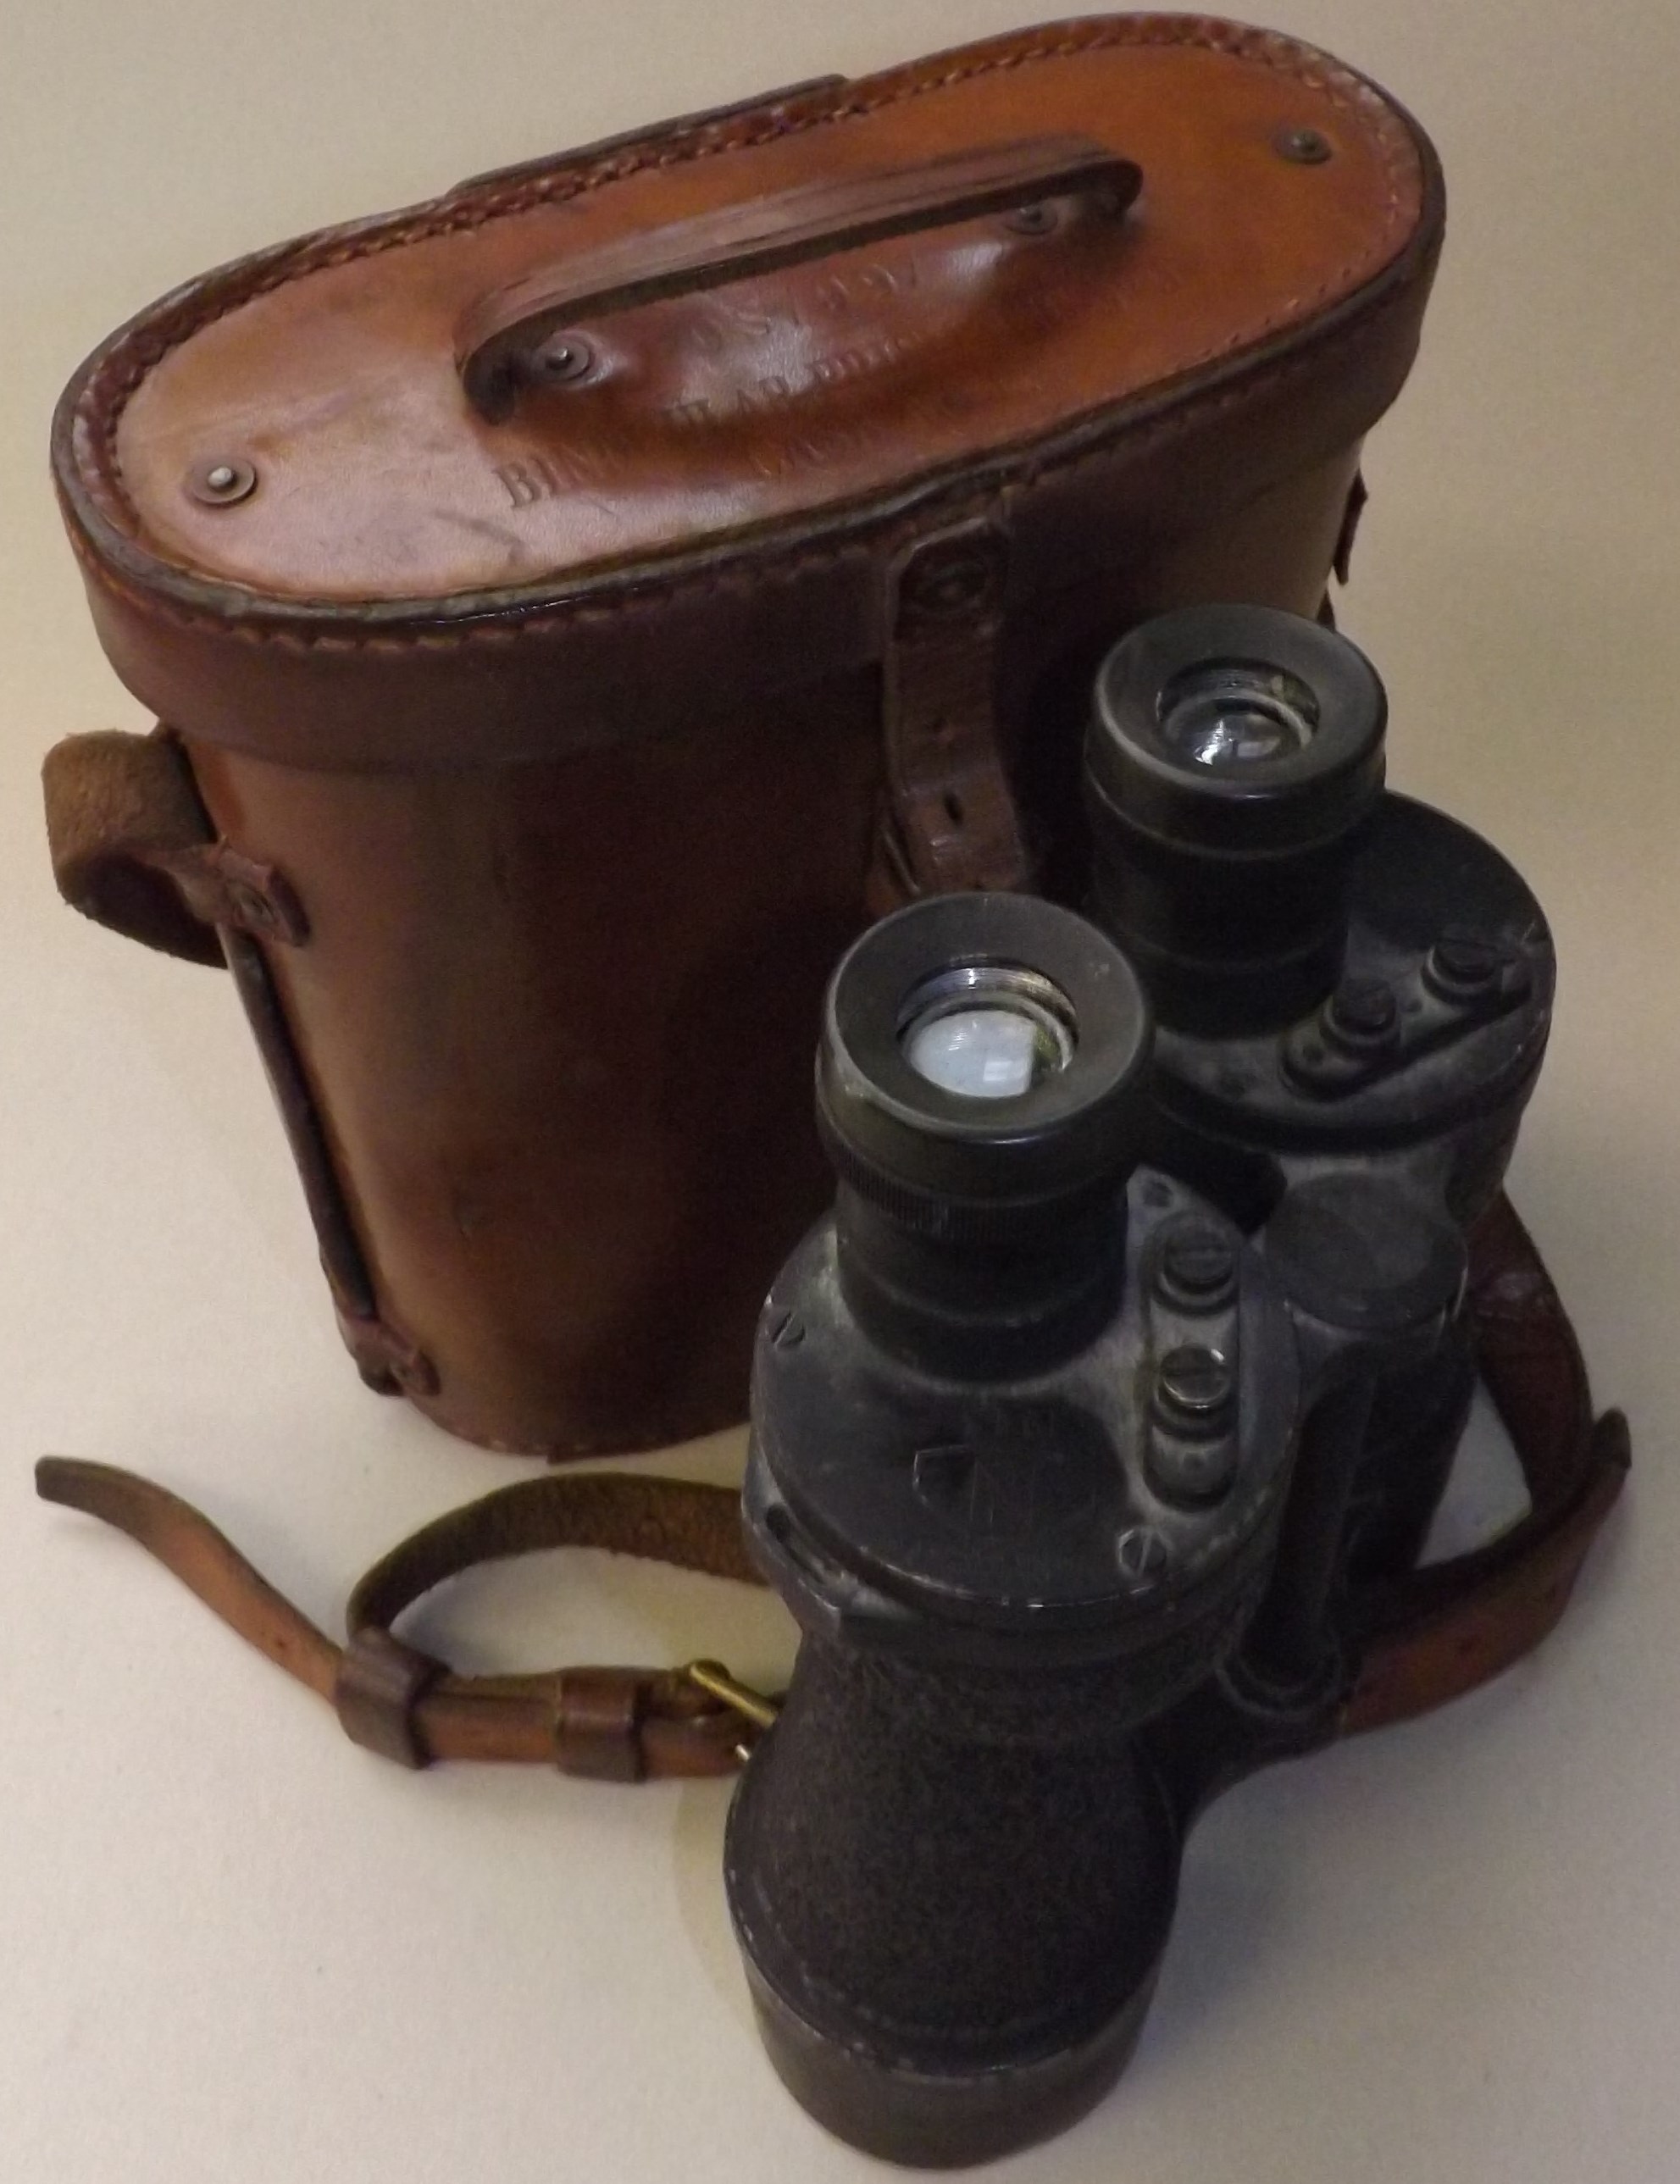 A pair of WWII military issue binoculars marked Bino Prism No. 5 NKIV4x7 and dated 1943 within